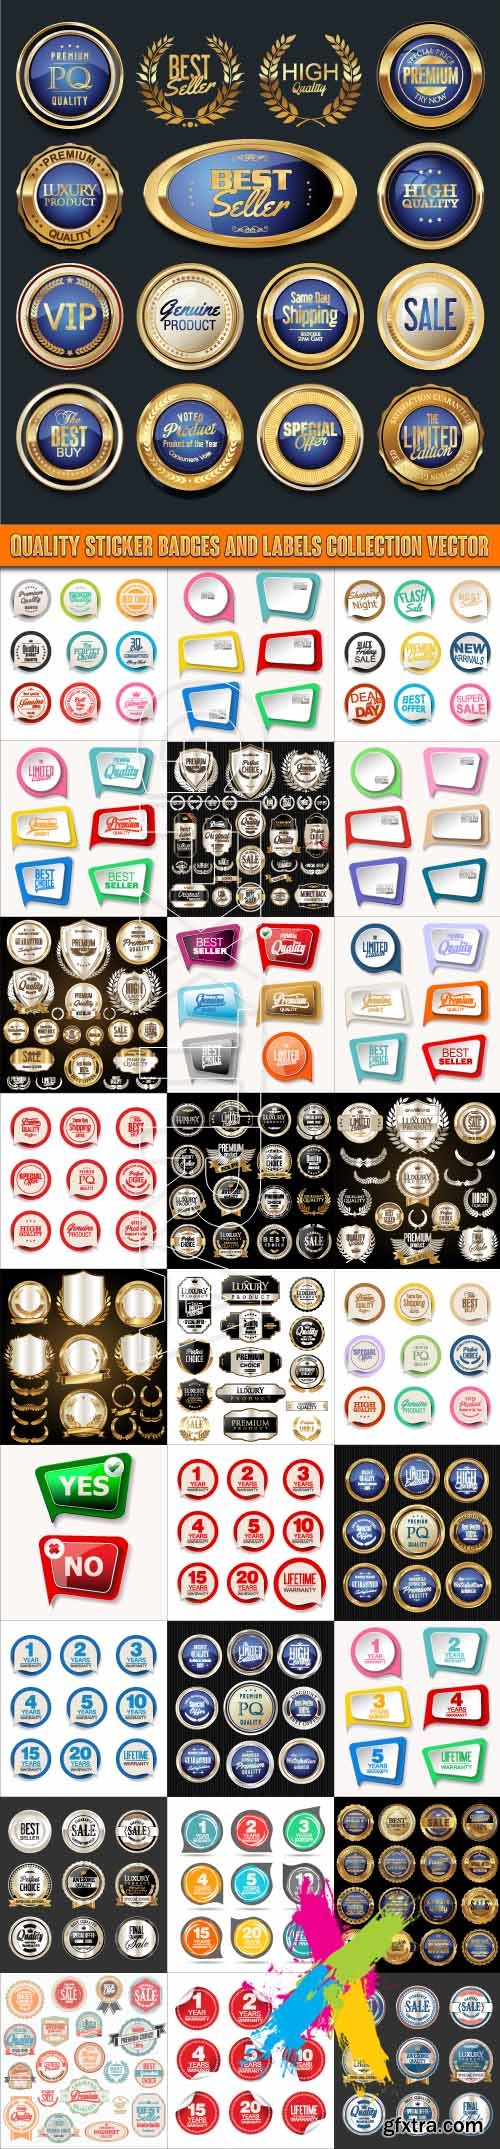 Quality Sticker badges and labels collection vector